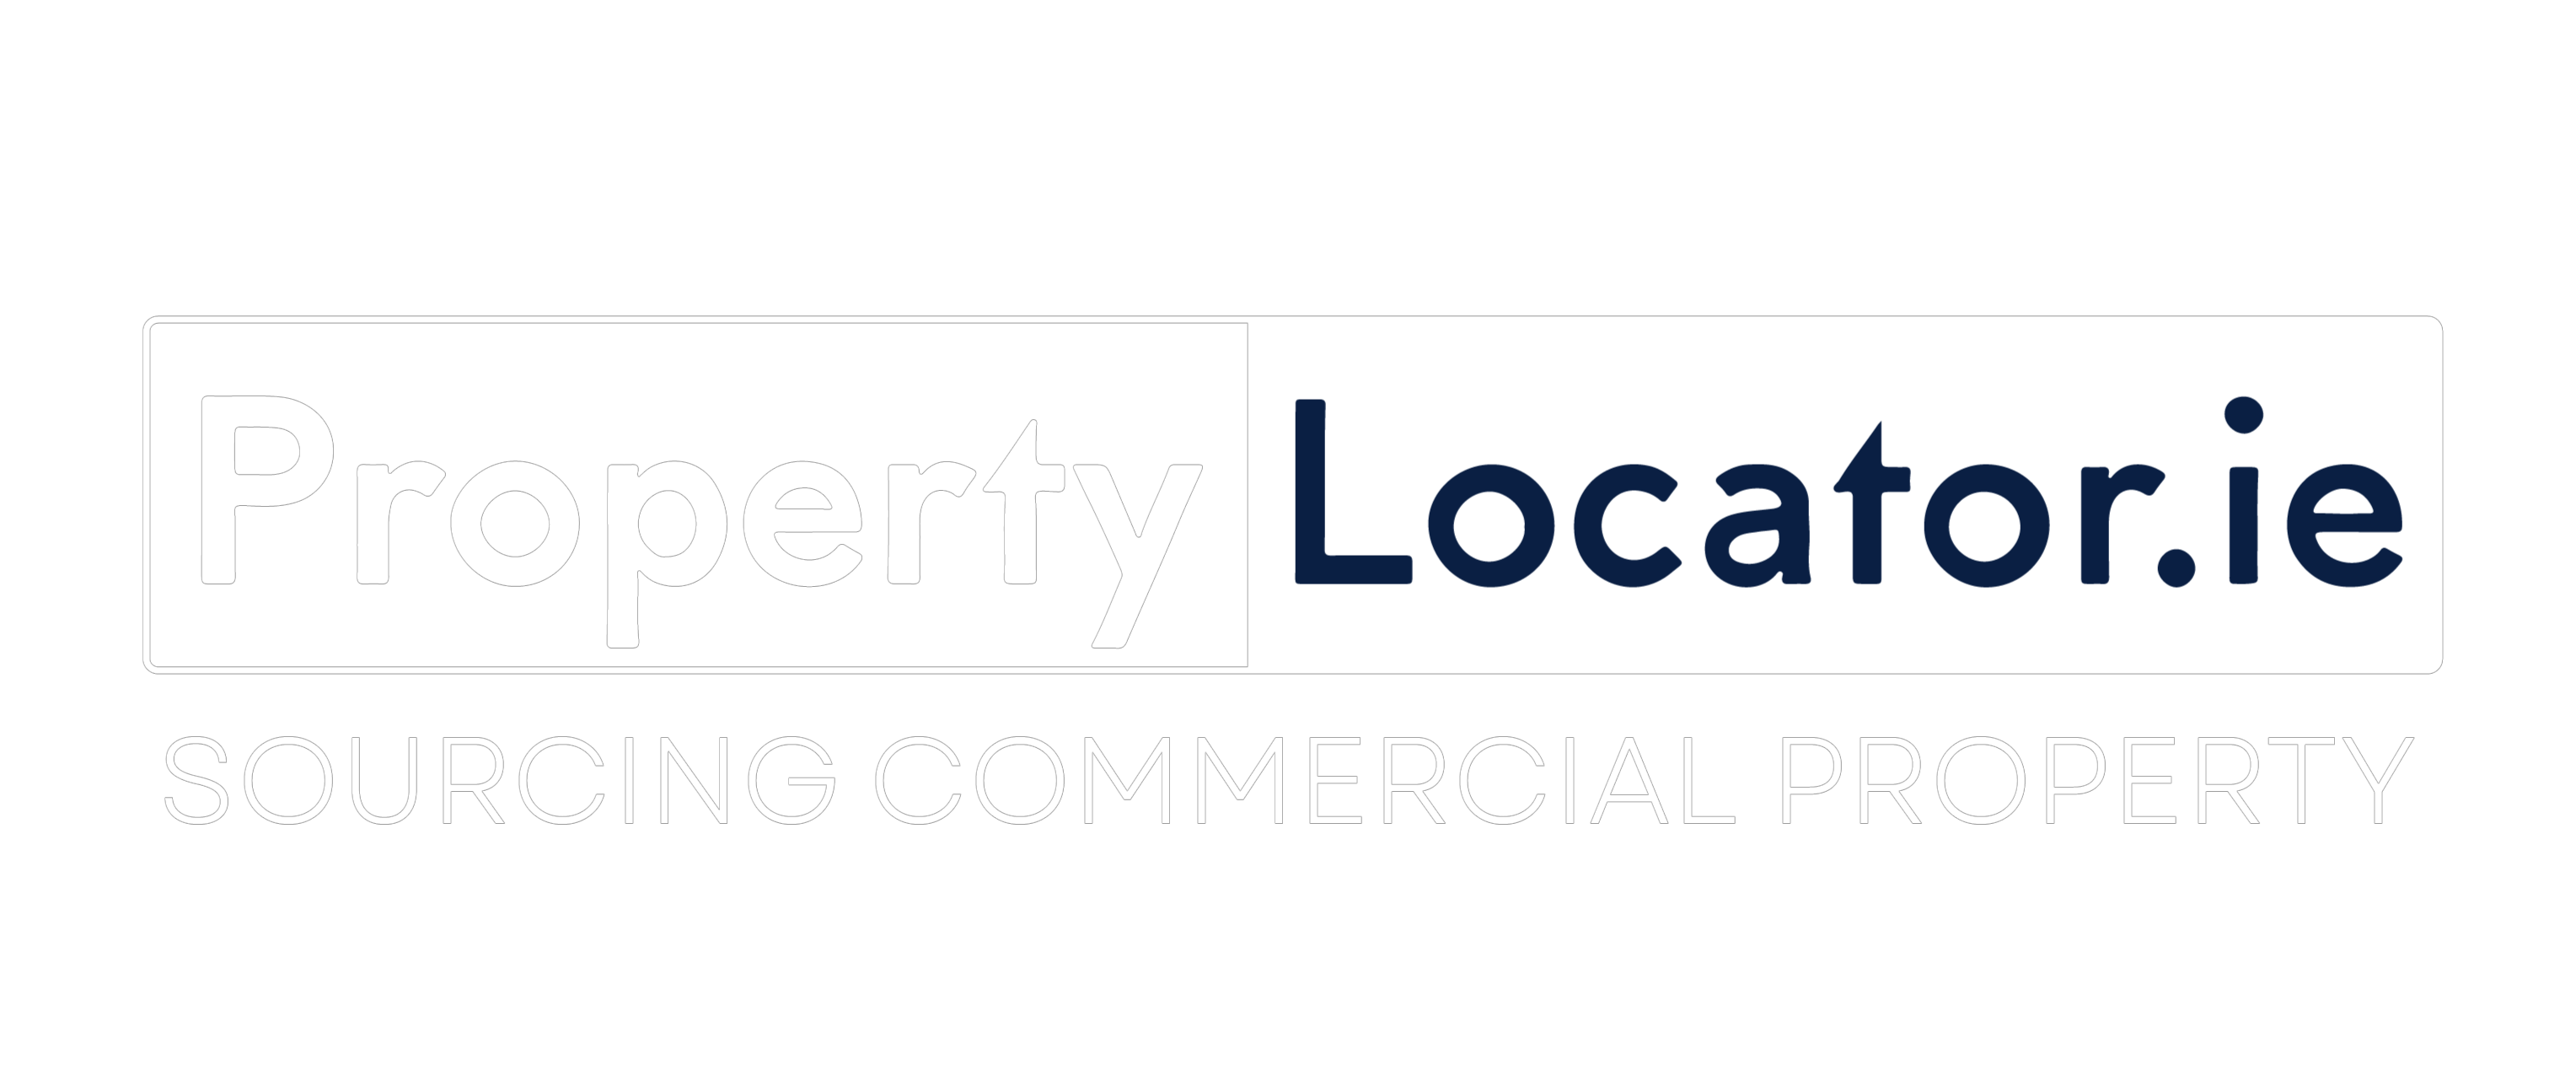 Welcome to PropertyLocator.ie